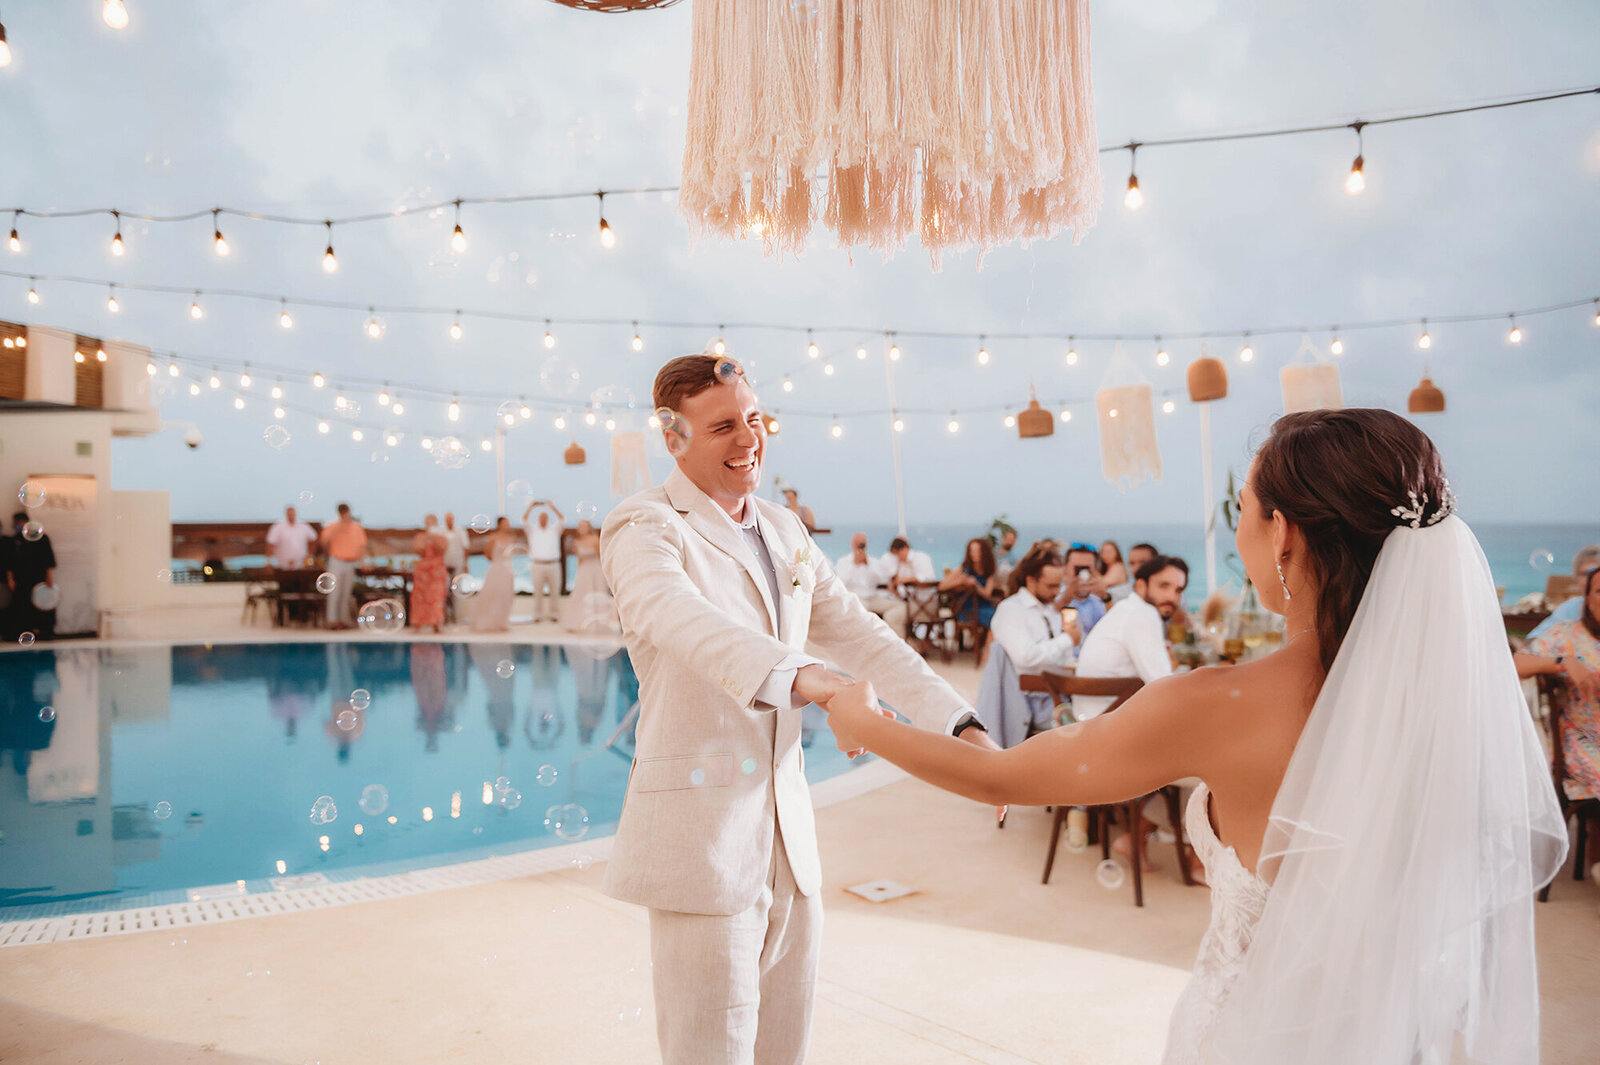 Newlyweds dance during their Micro-Wedding Reception at Live Aqua Resort in Cancun, Mexico.